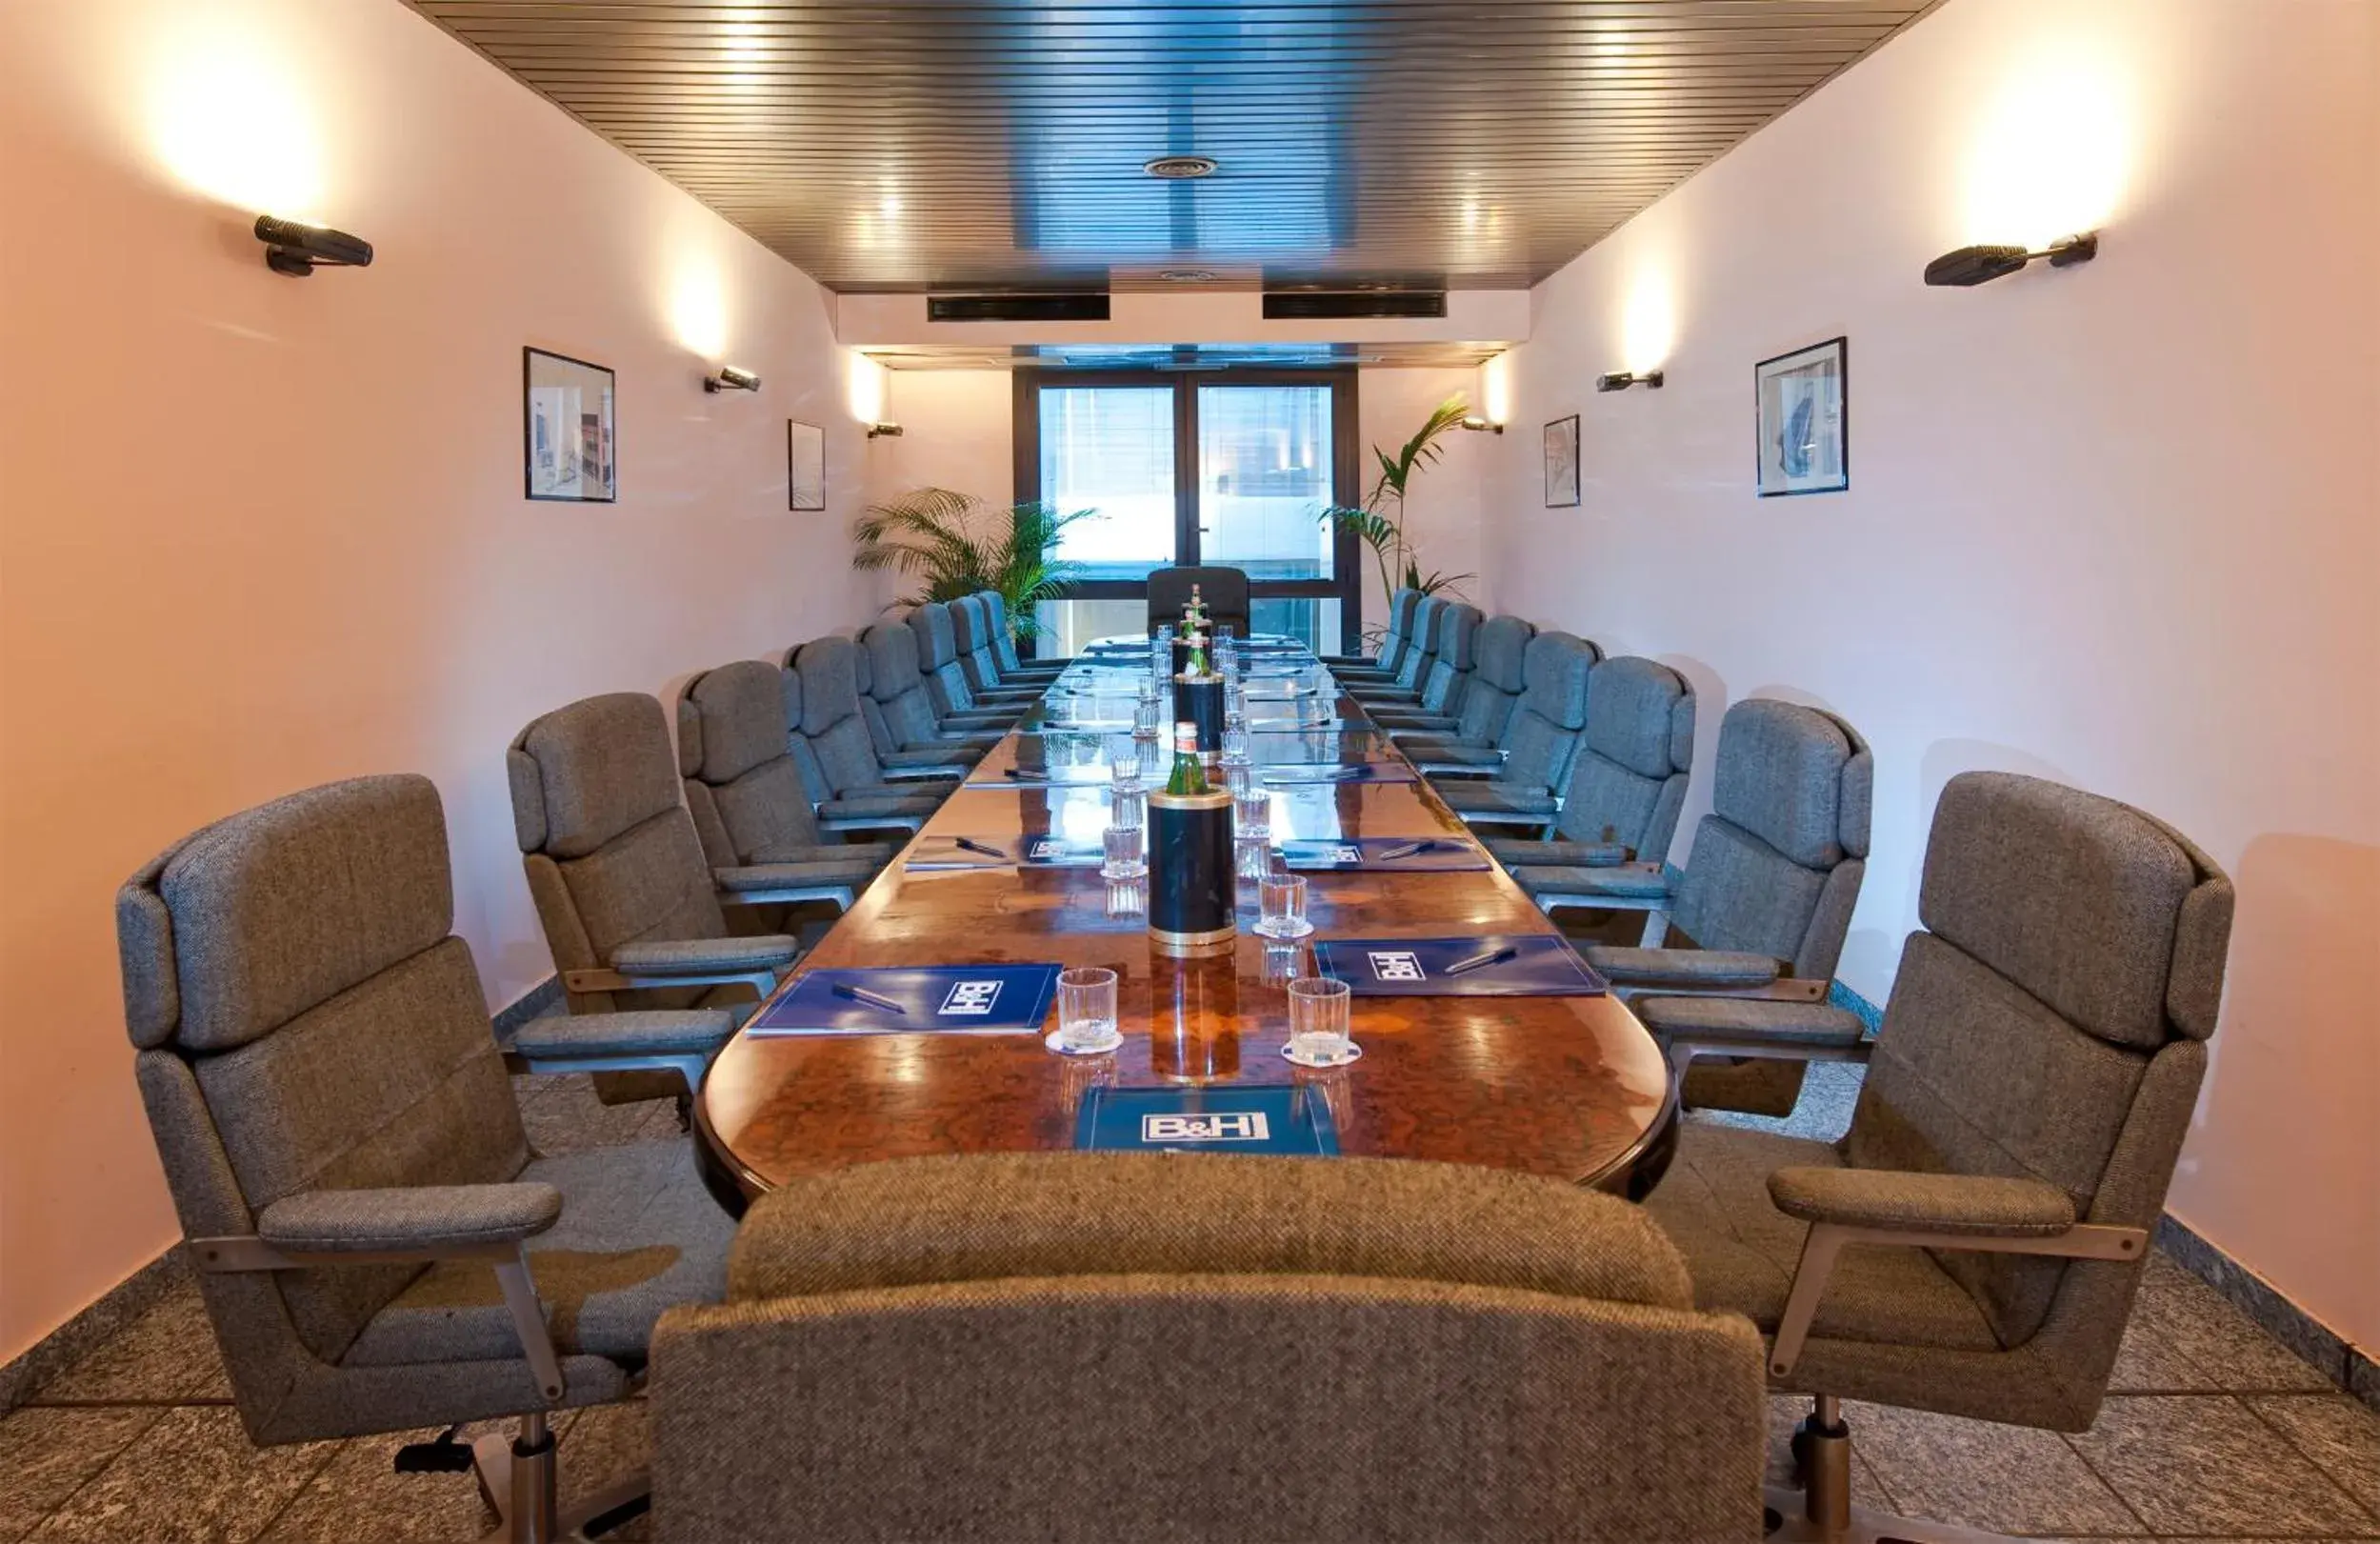 Business facilities in c-hotels Comtur